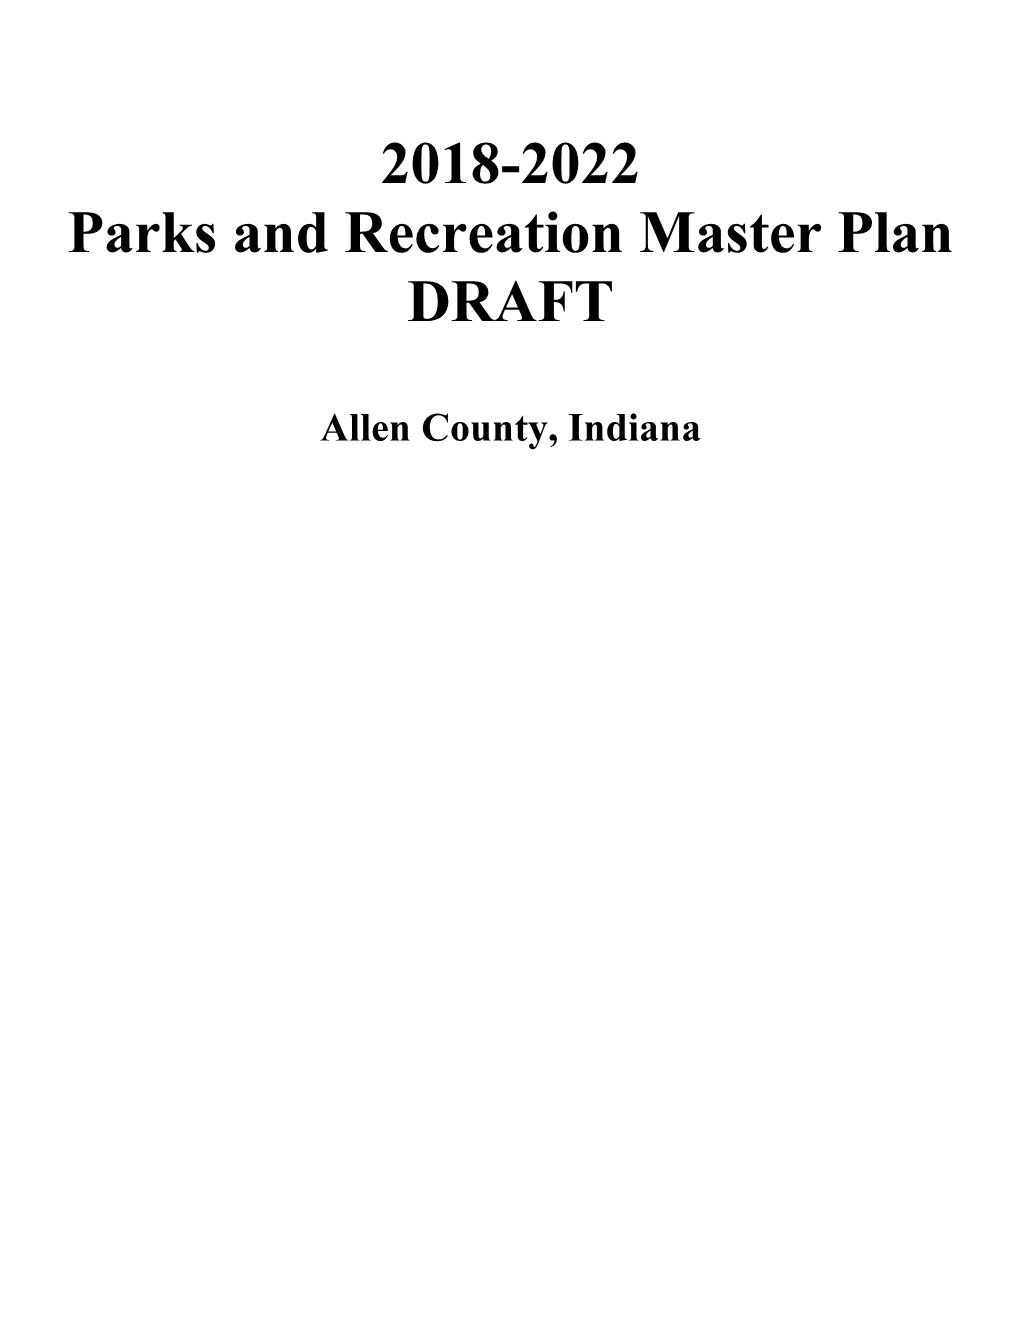 2018-2022 Parks and Recreation Master Plan DRAFT